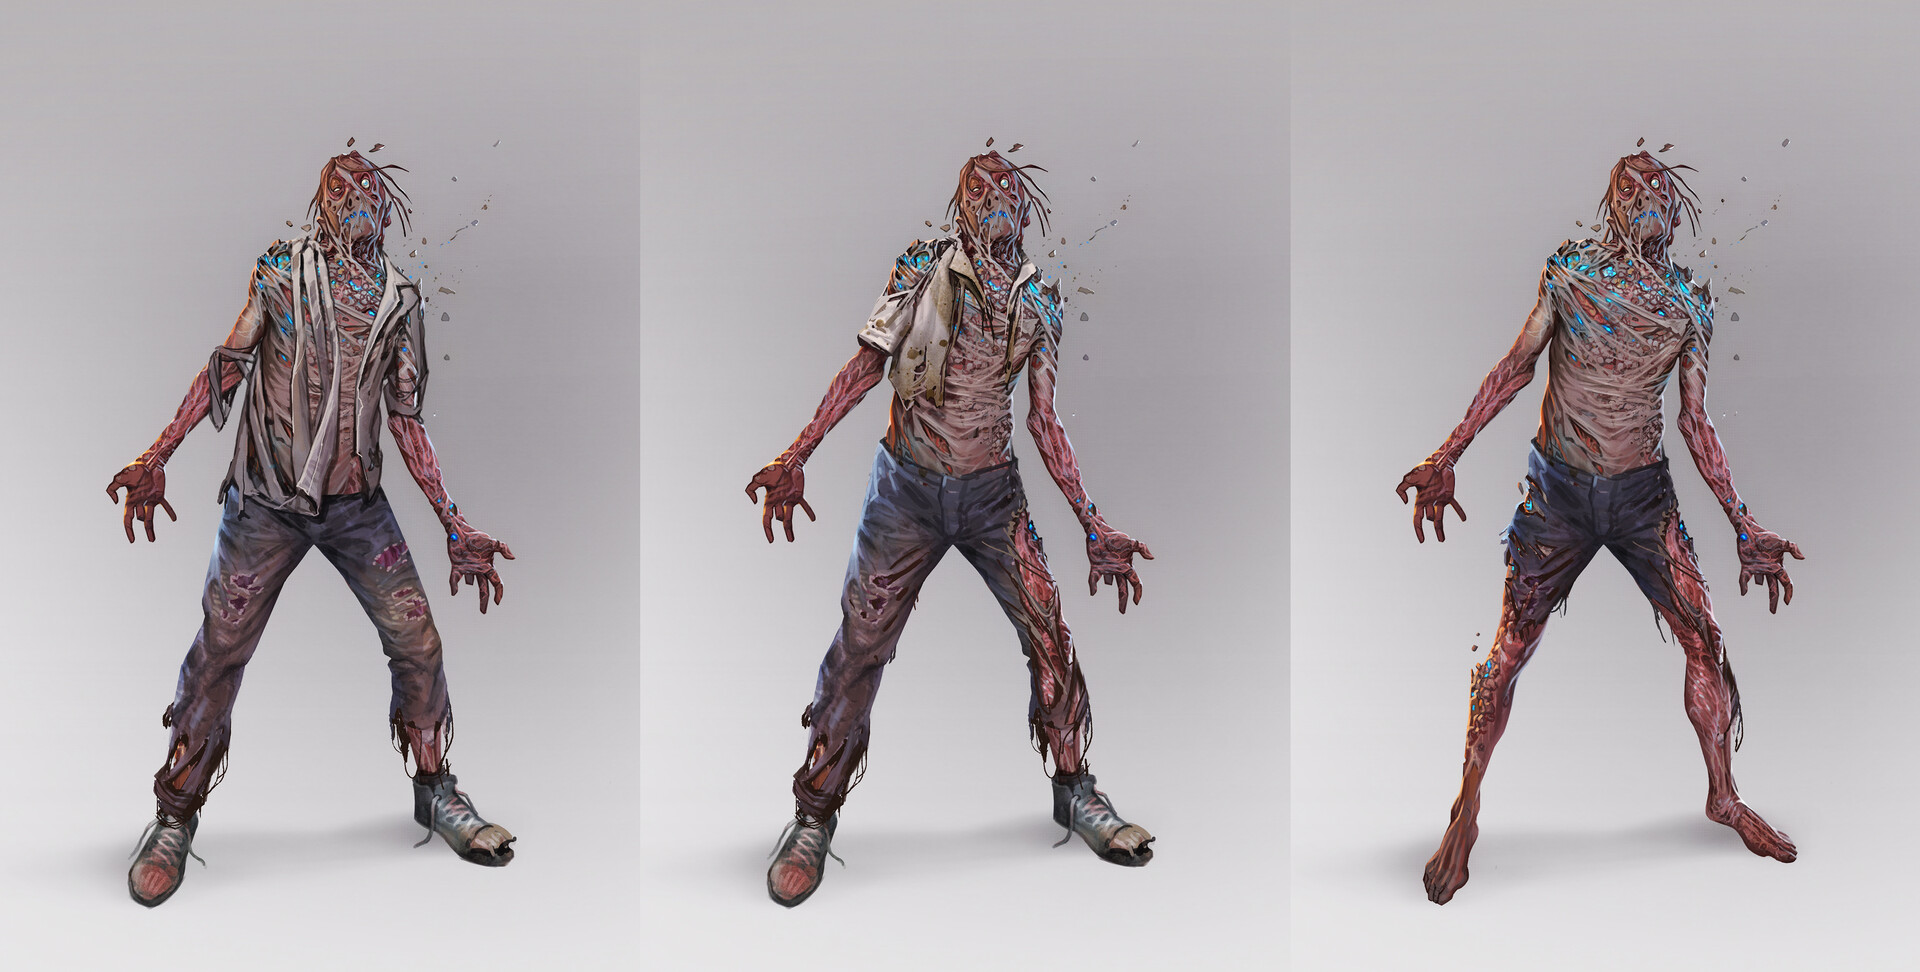 FO76 Concept art scorched ghouls of Appalachia (3) .jpg (311 KB) .